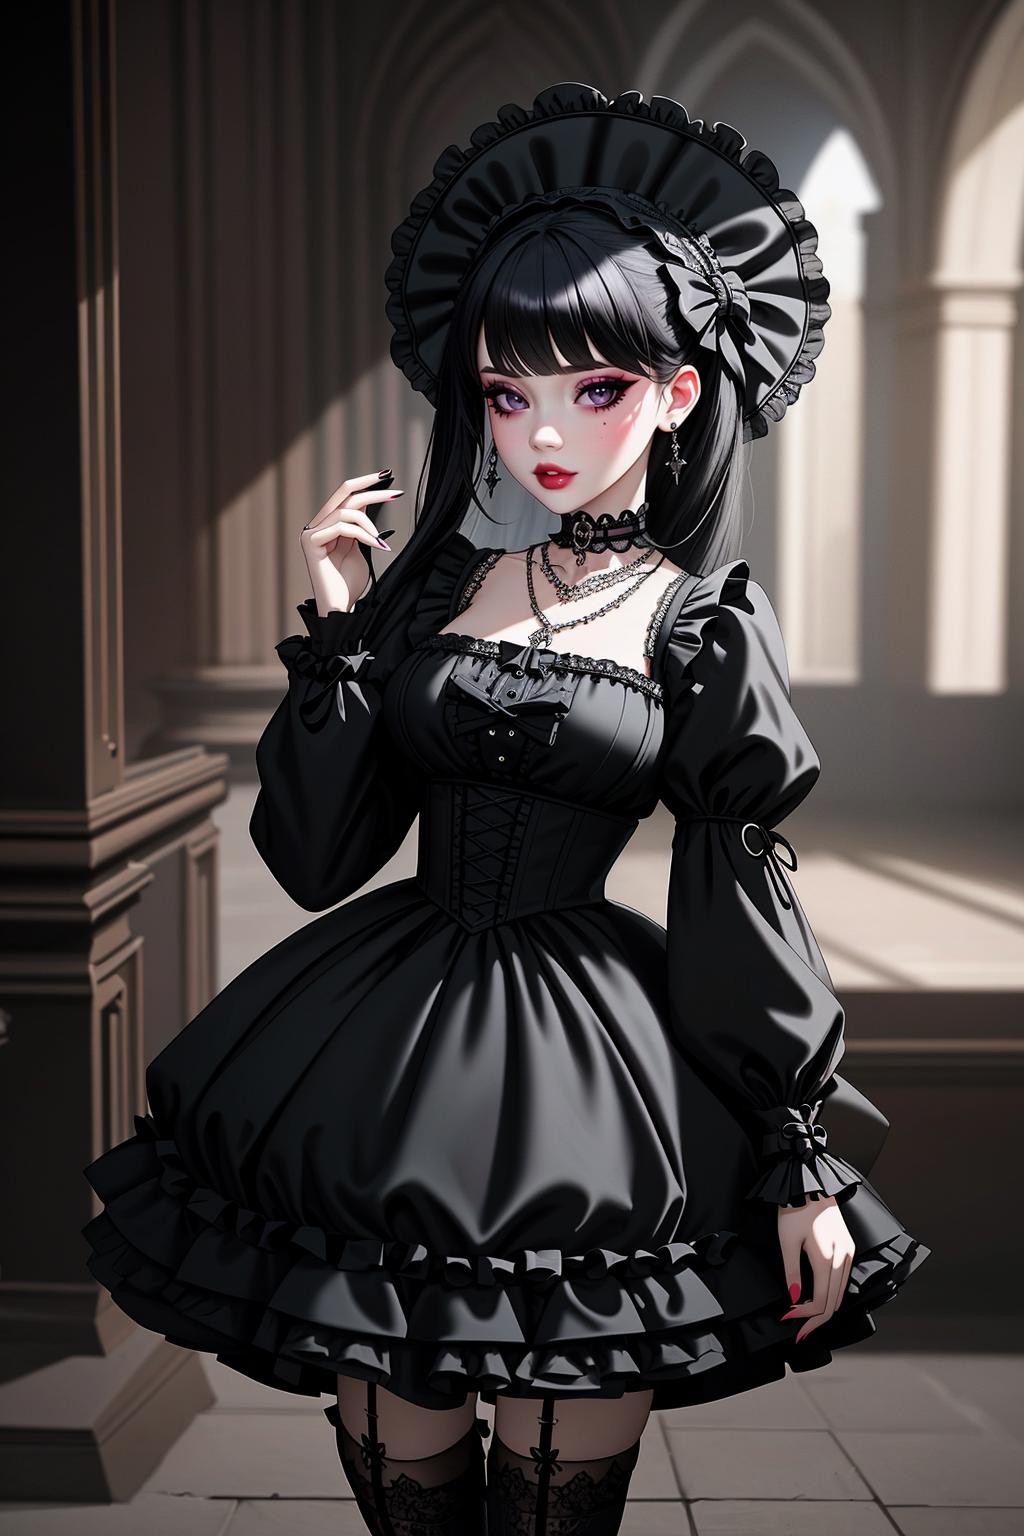 Gothic anime girl in dress castle by Geoserig on DeviantArt